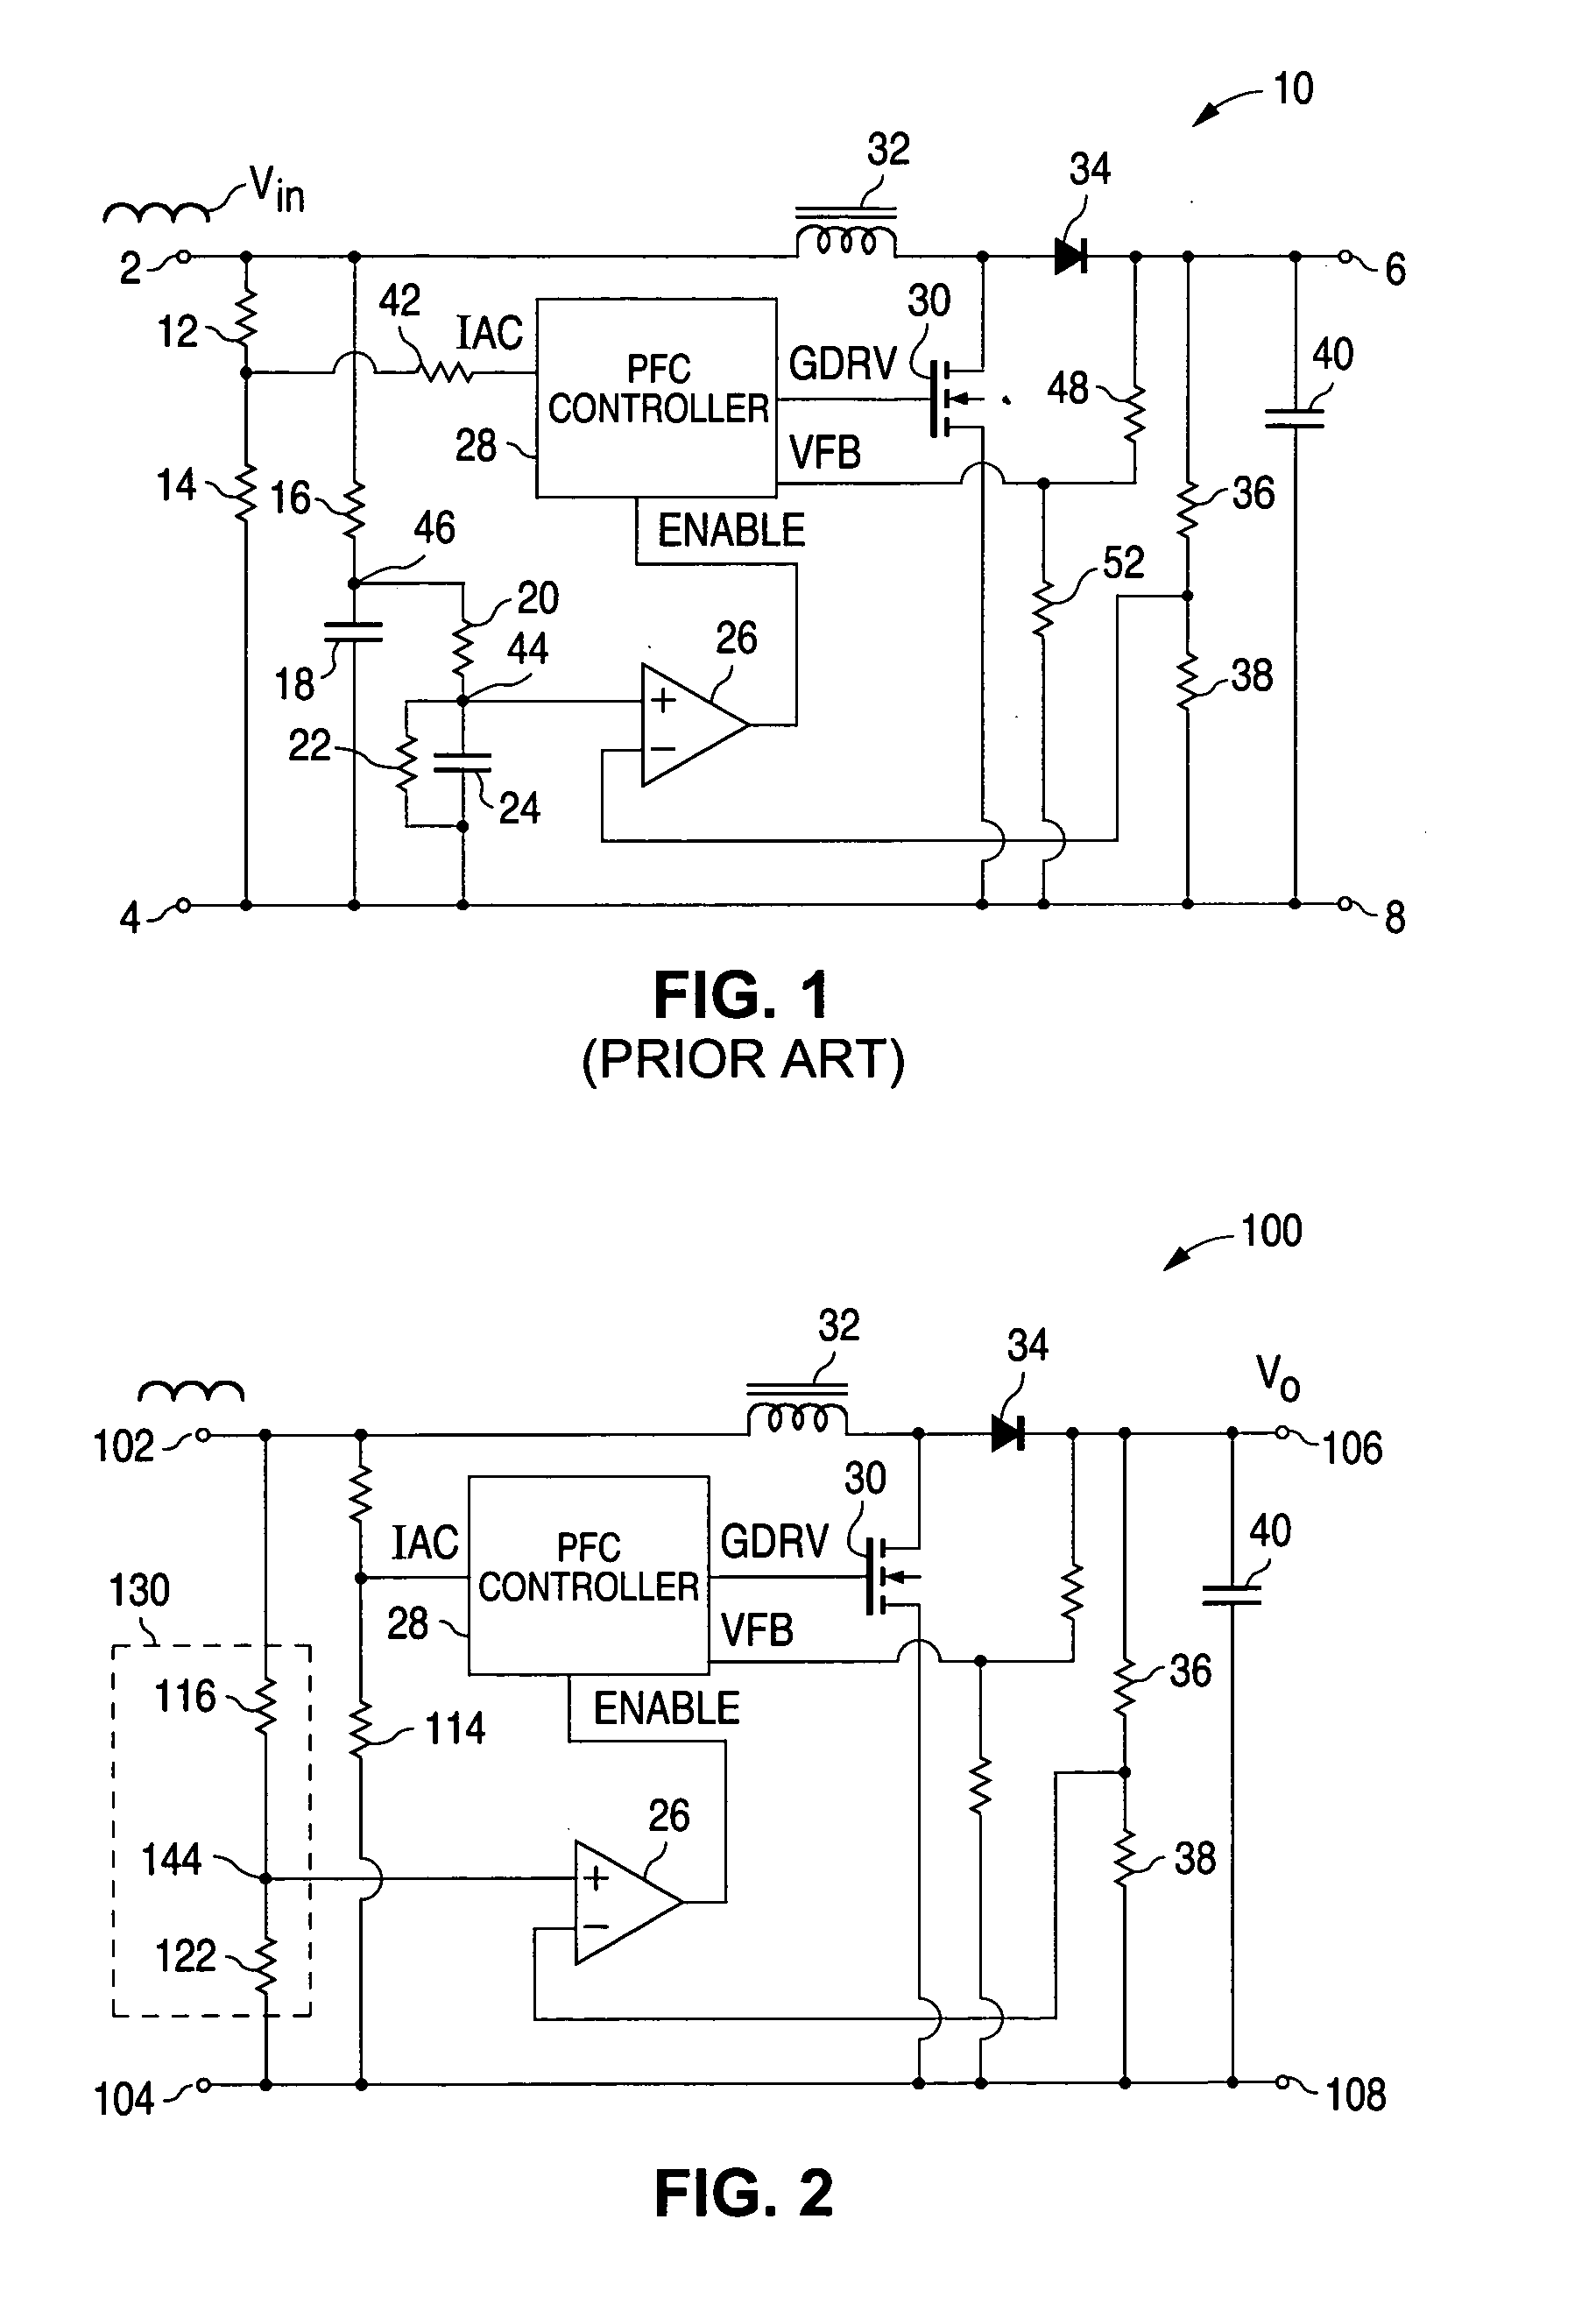 Real-time voltage detection and protection circuit for PFC boost converters